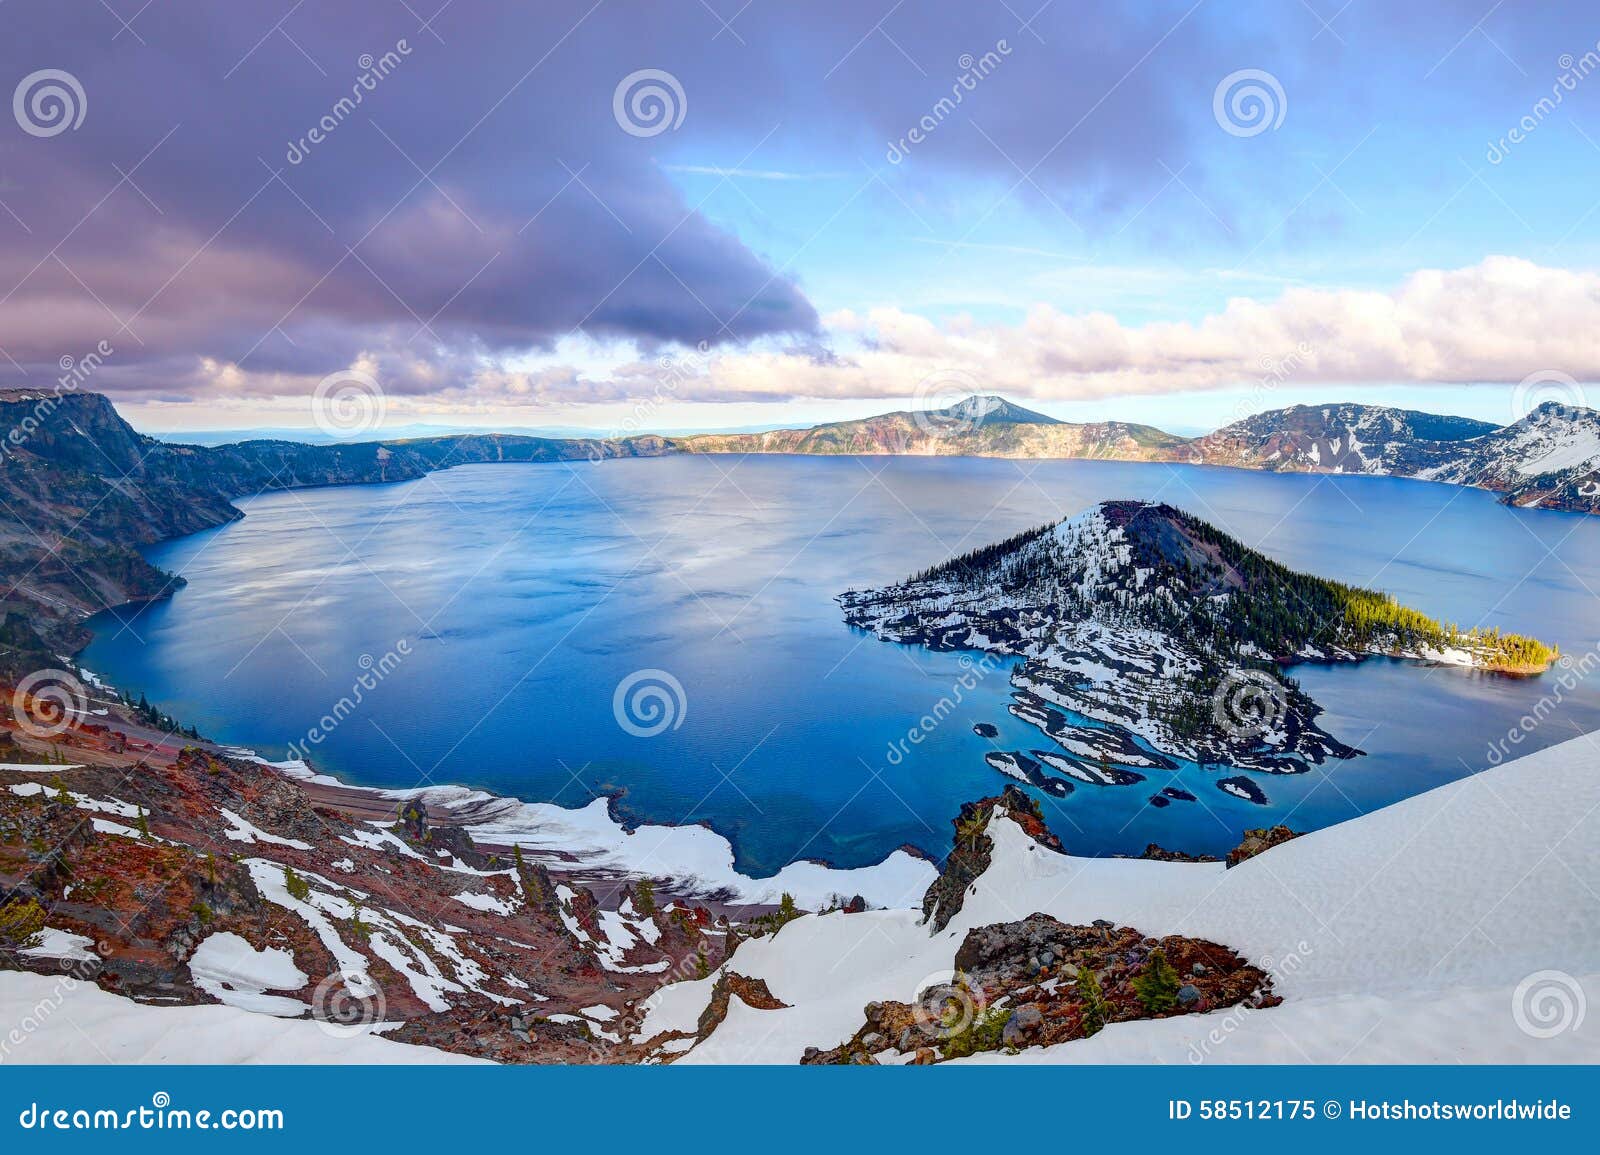 sunset over crater lake , crater lake national park, oregon